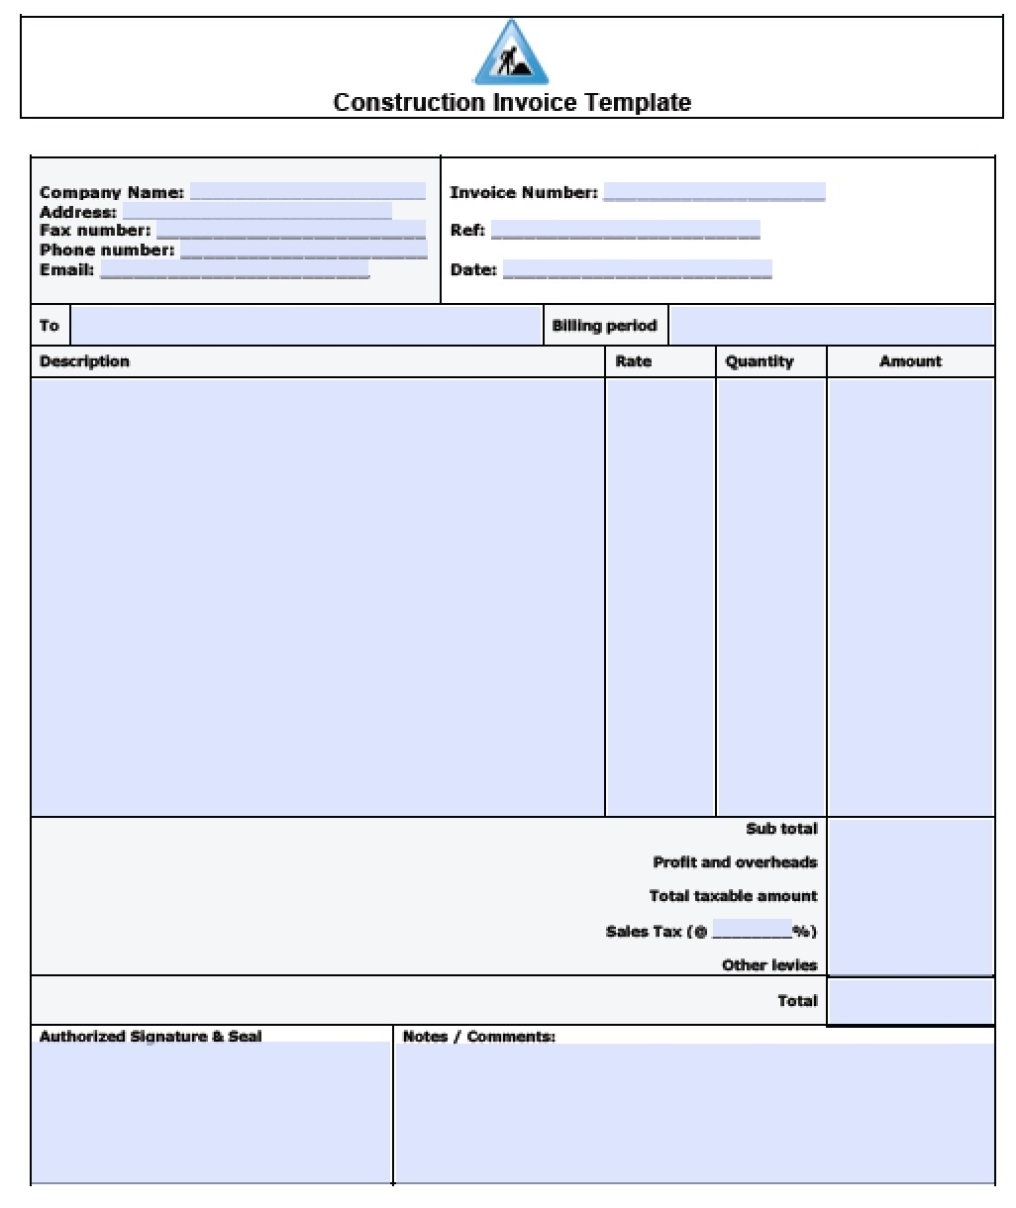 Free Construction Service Invoice Template | Pdf | Word | Excel Inside Free Roofing Invoice Template